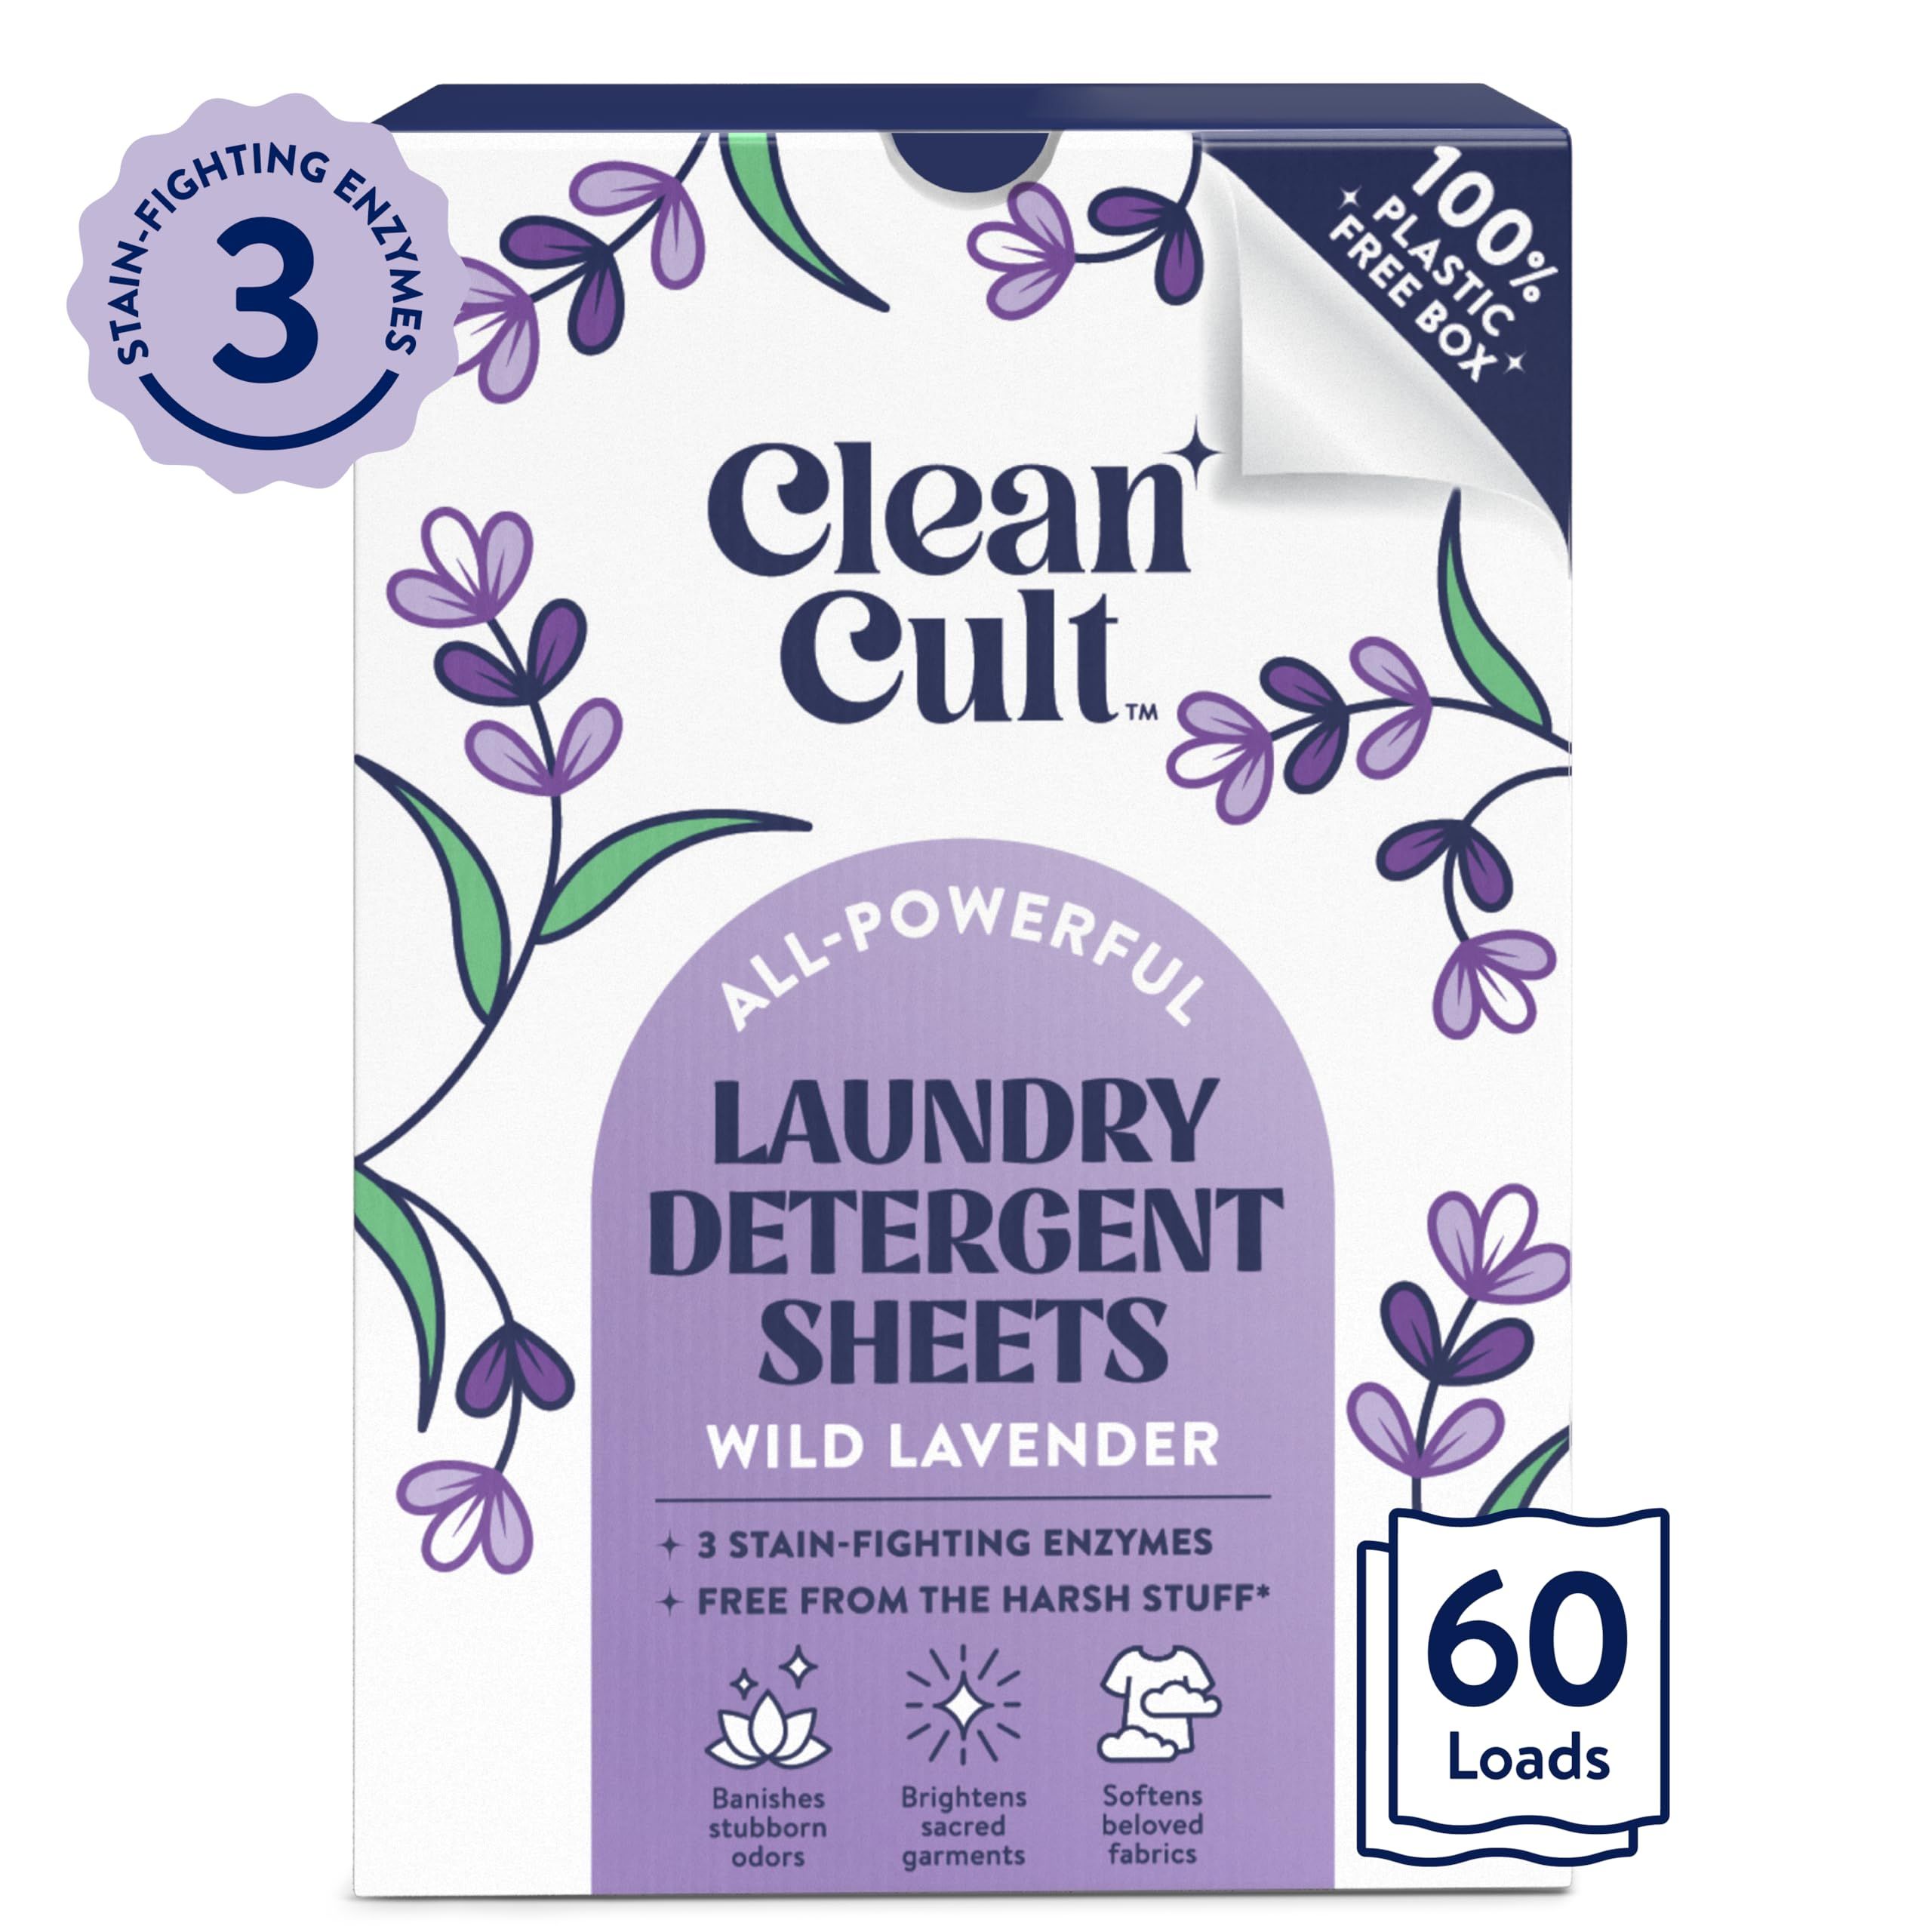 Cleancult Laundry Detergent Sheets - 3 Stain Fighting Enzymes - Concentrated Liquidless Laundry D... | Amazon (US)